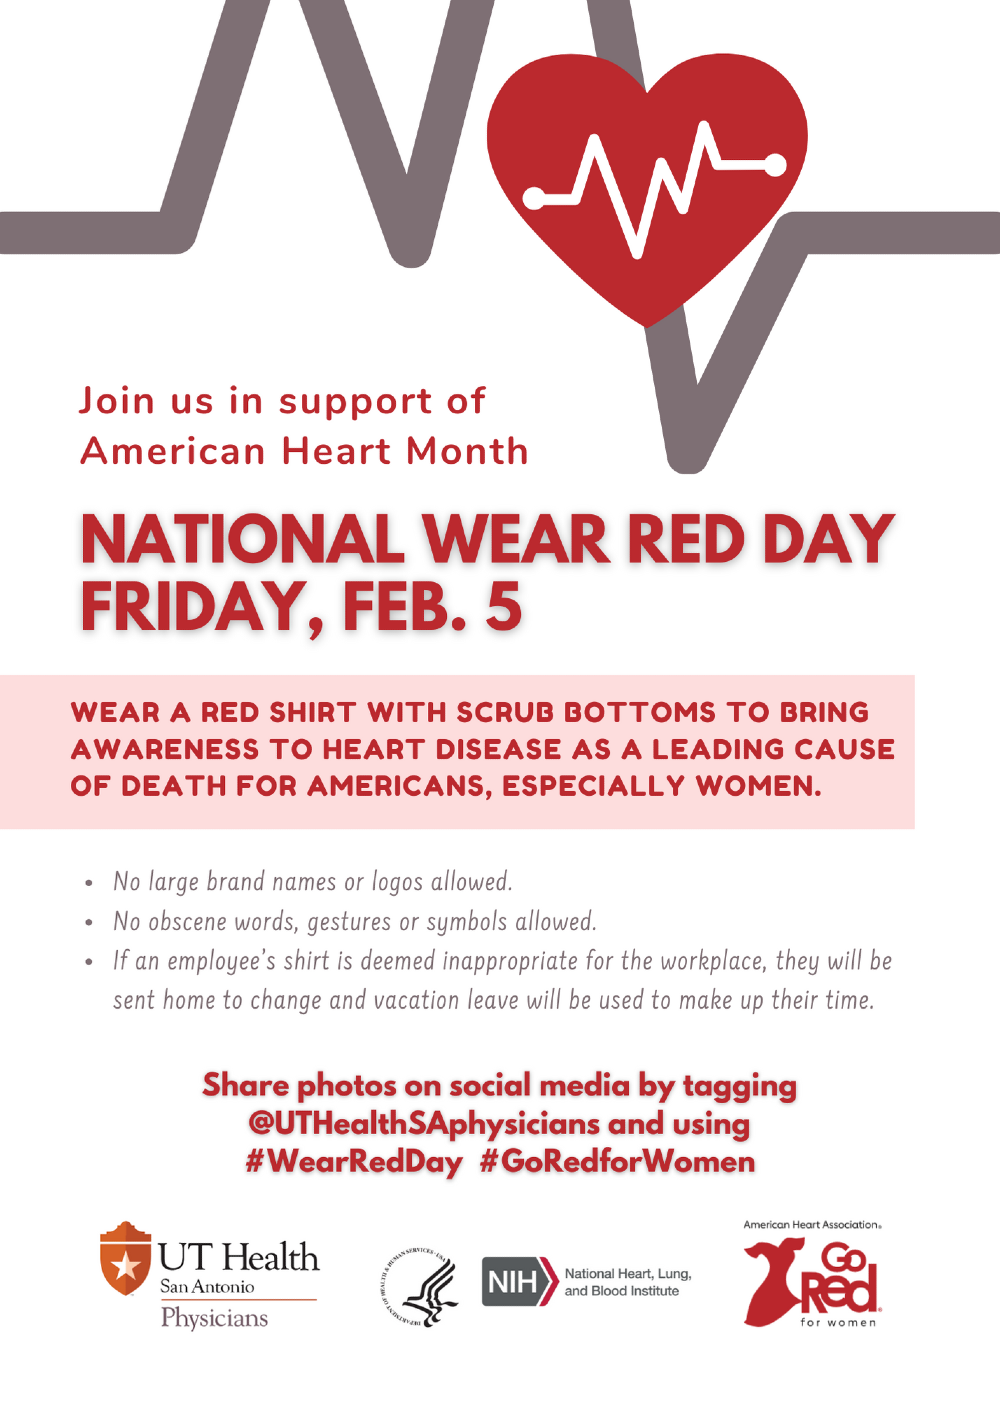 UT Health Physicians Wear Red Day on Feb. 5, 2021